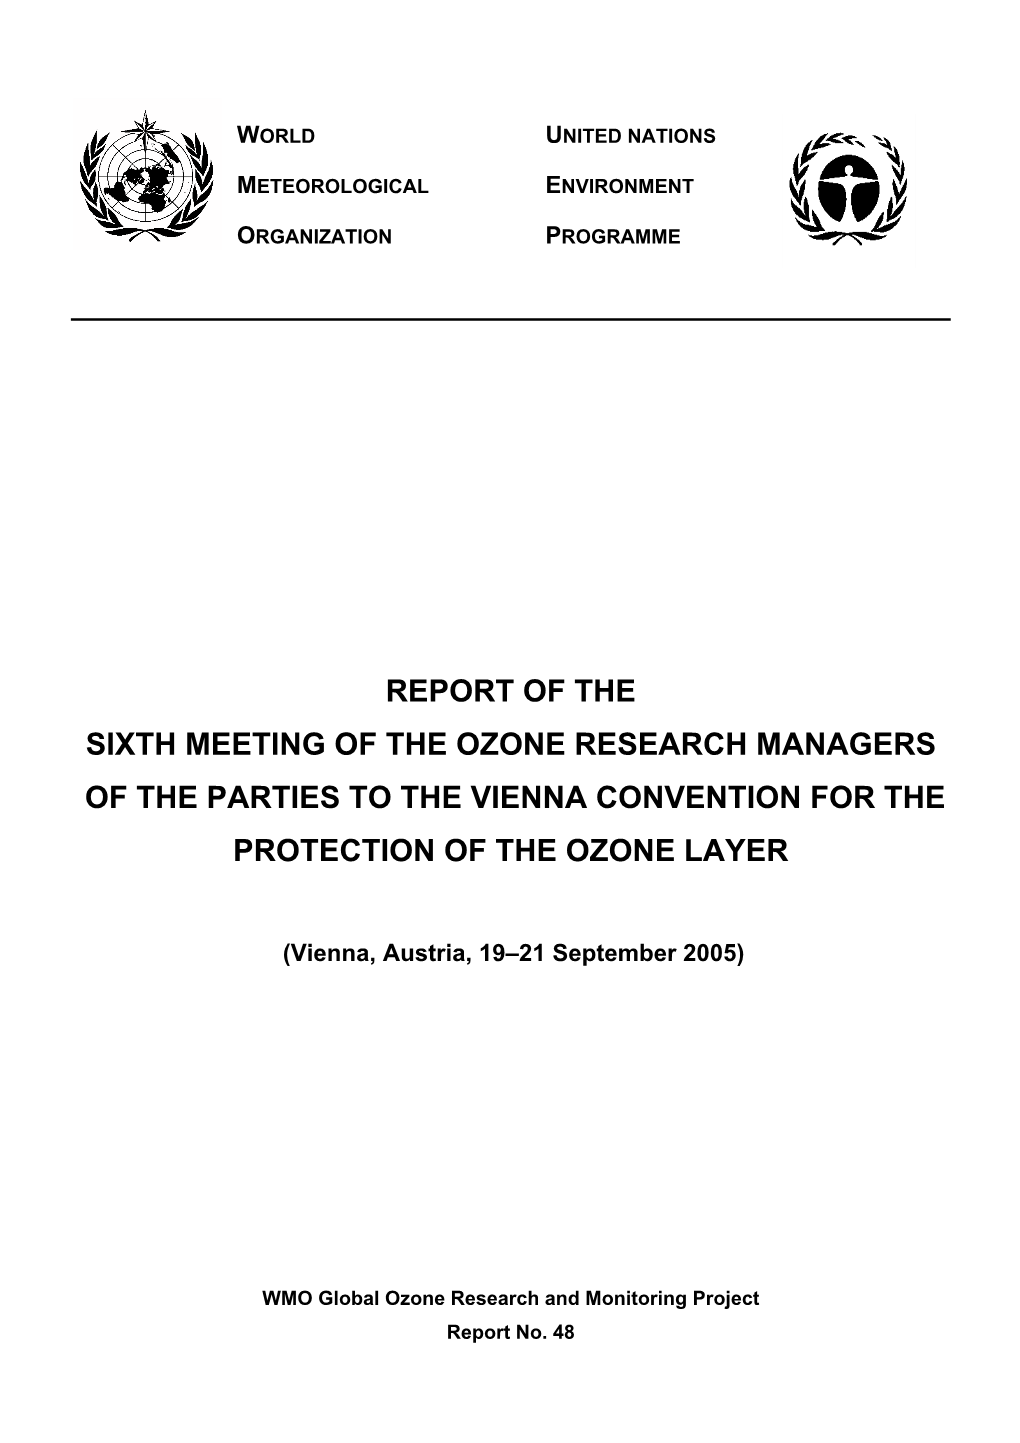 Report of the Sixth Meeting of the Ozone Research Managers of the Parties to the Vienna Convention for the Protection of the Ozone Layer